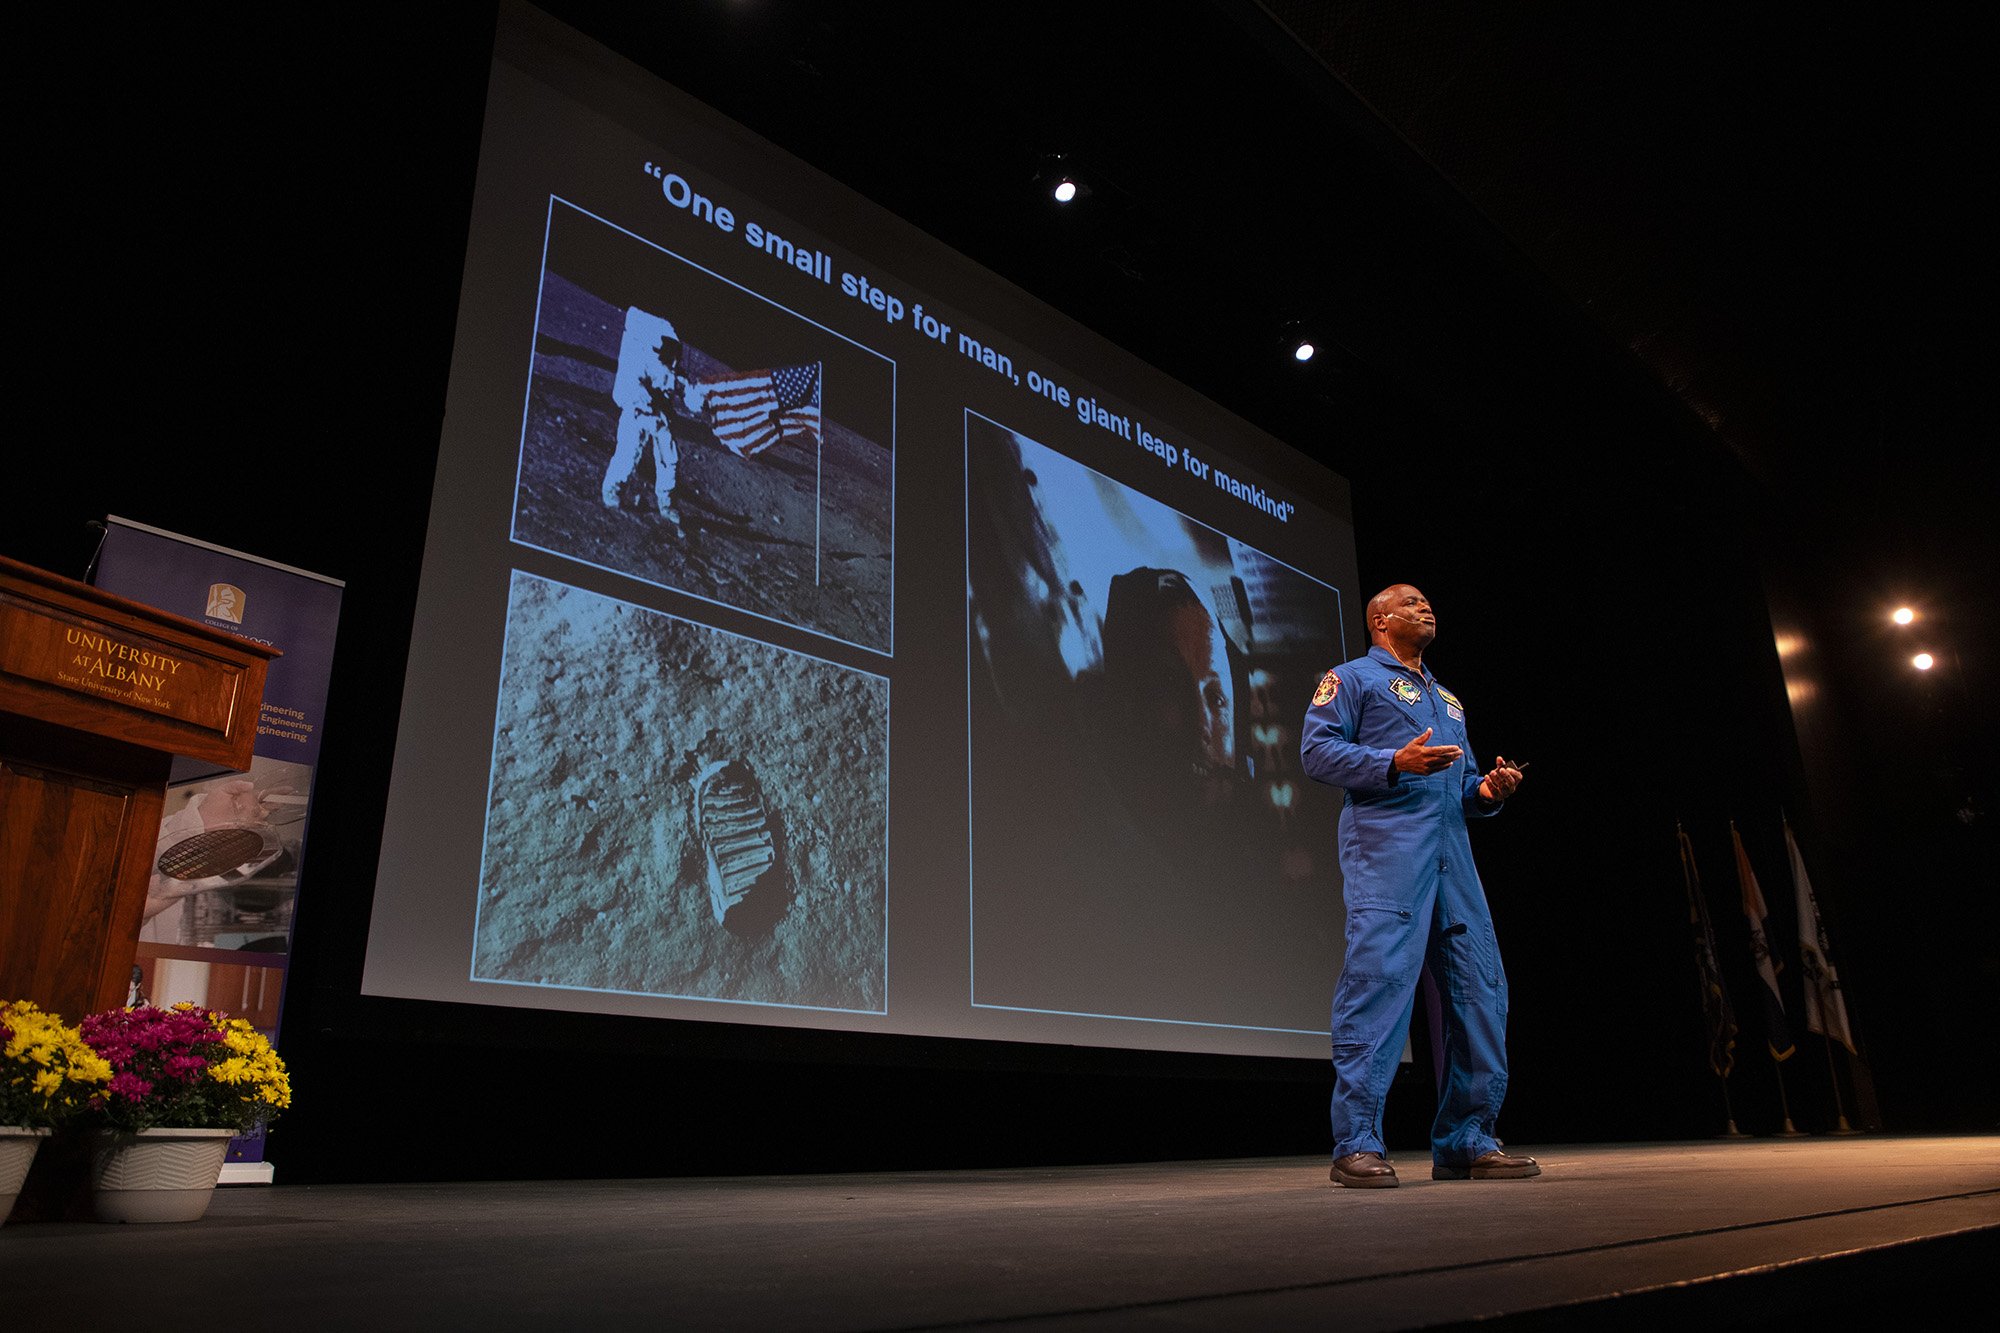 Former Astronaut Leland Melvin delivers the 10th Annual Bunshaft Lecture at UAlbany's Performing Arts Center.